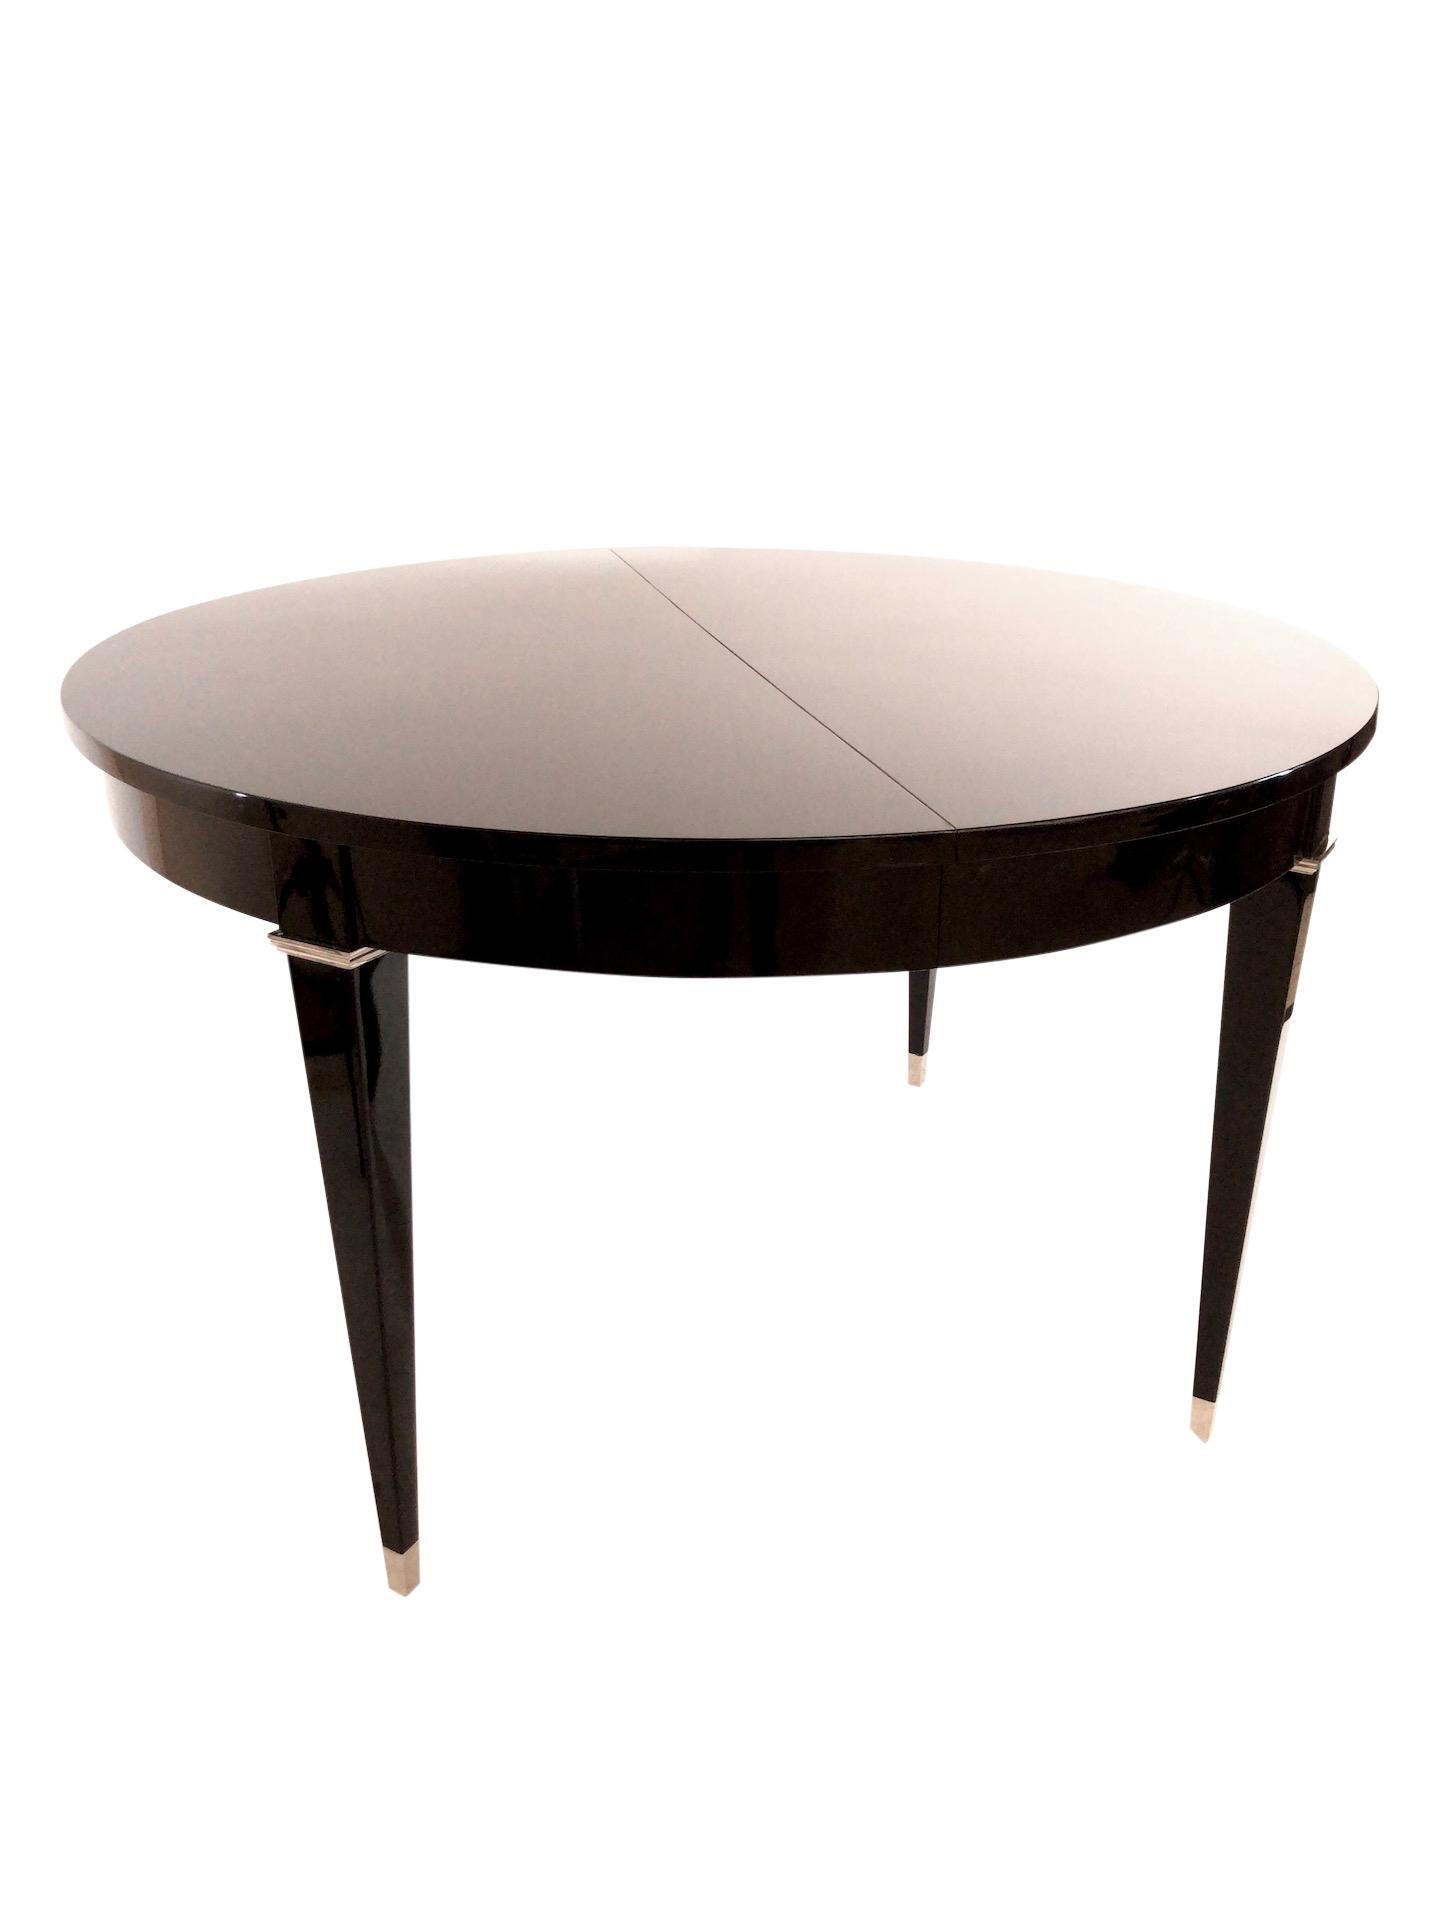 Most dining tables in the Art Deco era were rectangular.
This one is a rare round one.
Black Piano lacquer.
All metal applications are original and fresh nickeled.
The table is capable to extend.